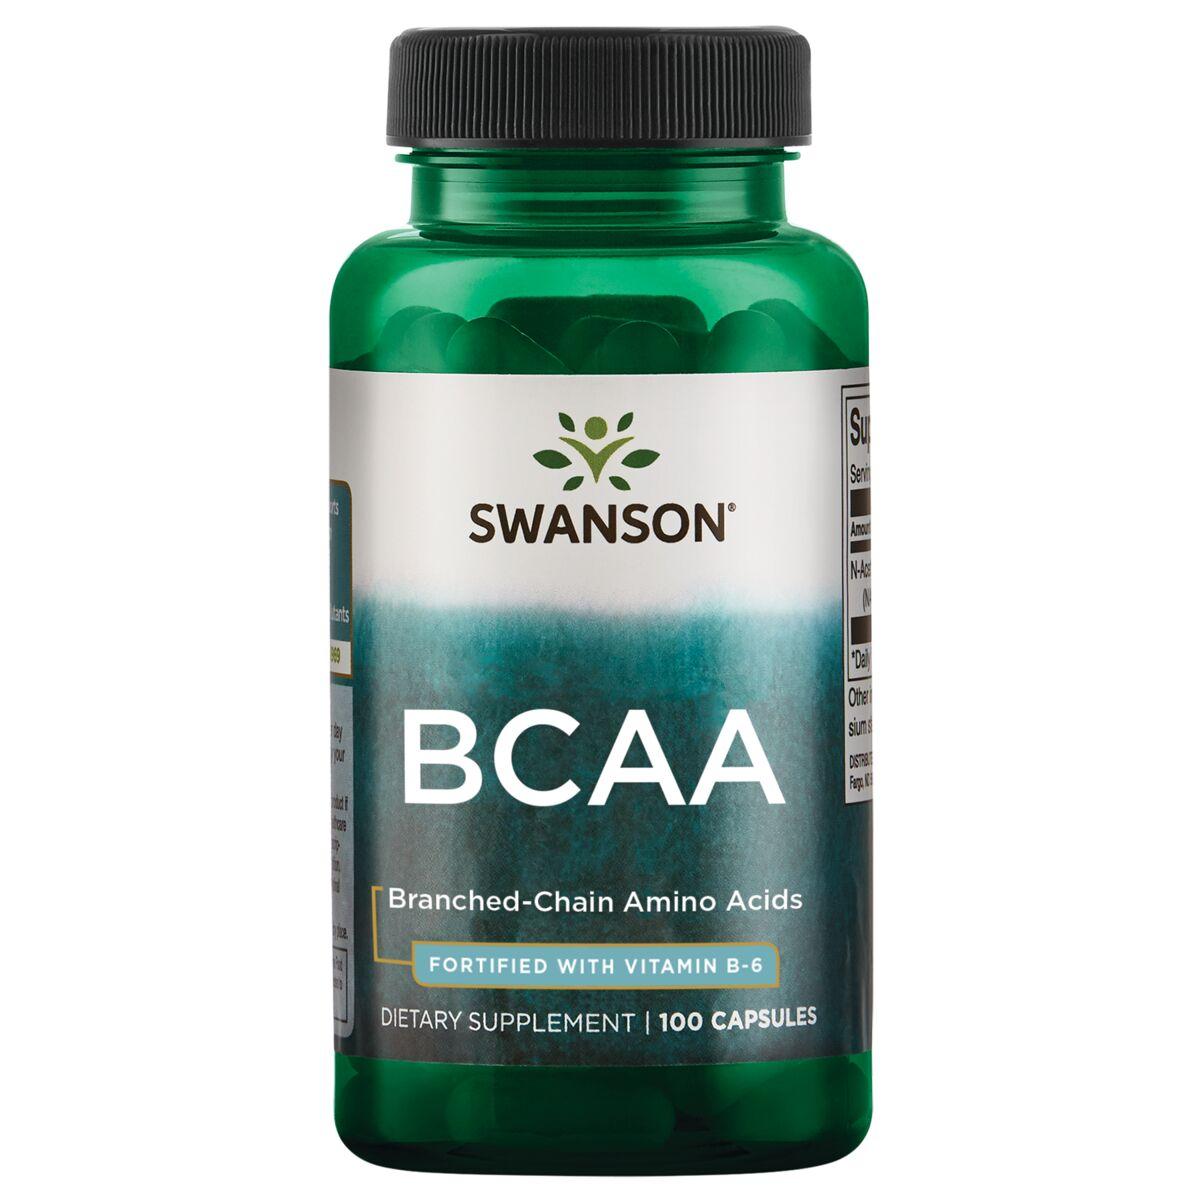 Swanson Premium Bcaa Branched-Chain Amino Acids - Fortified with Vitamin B6 100 Caps